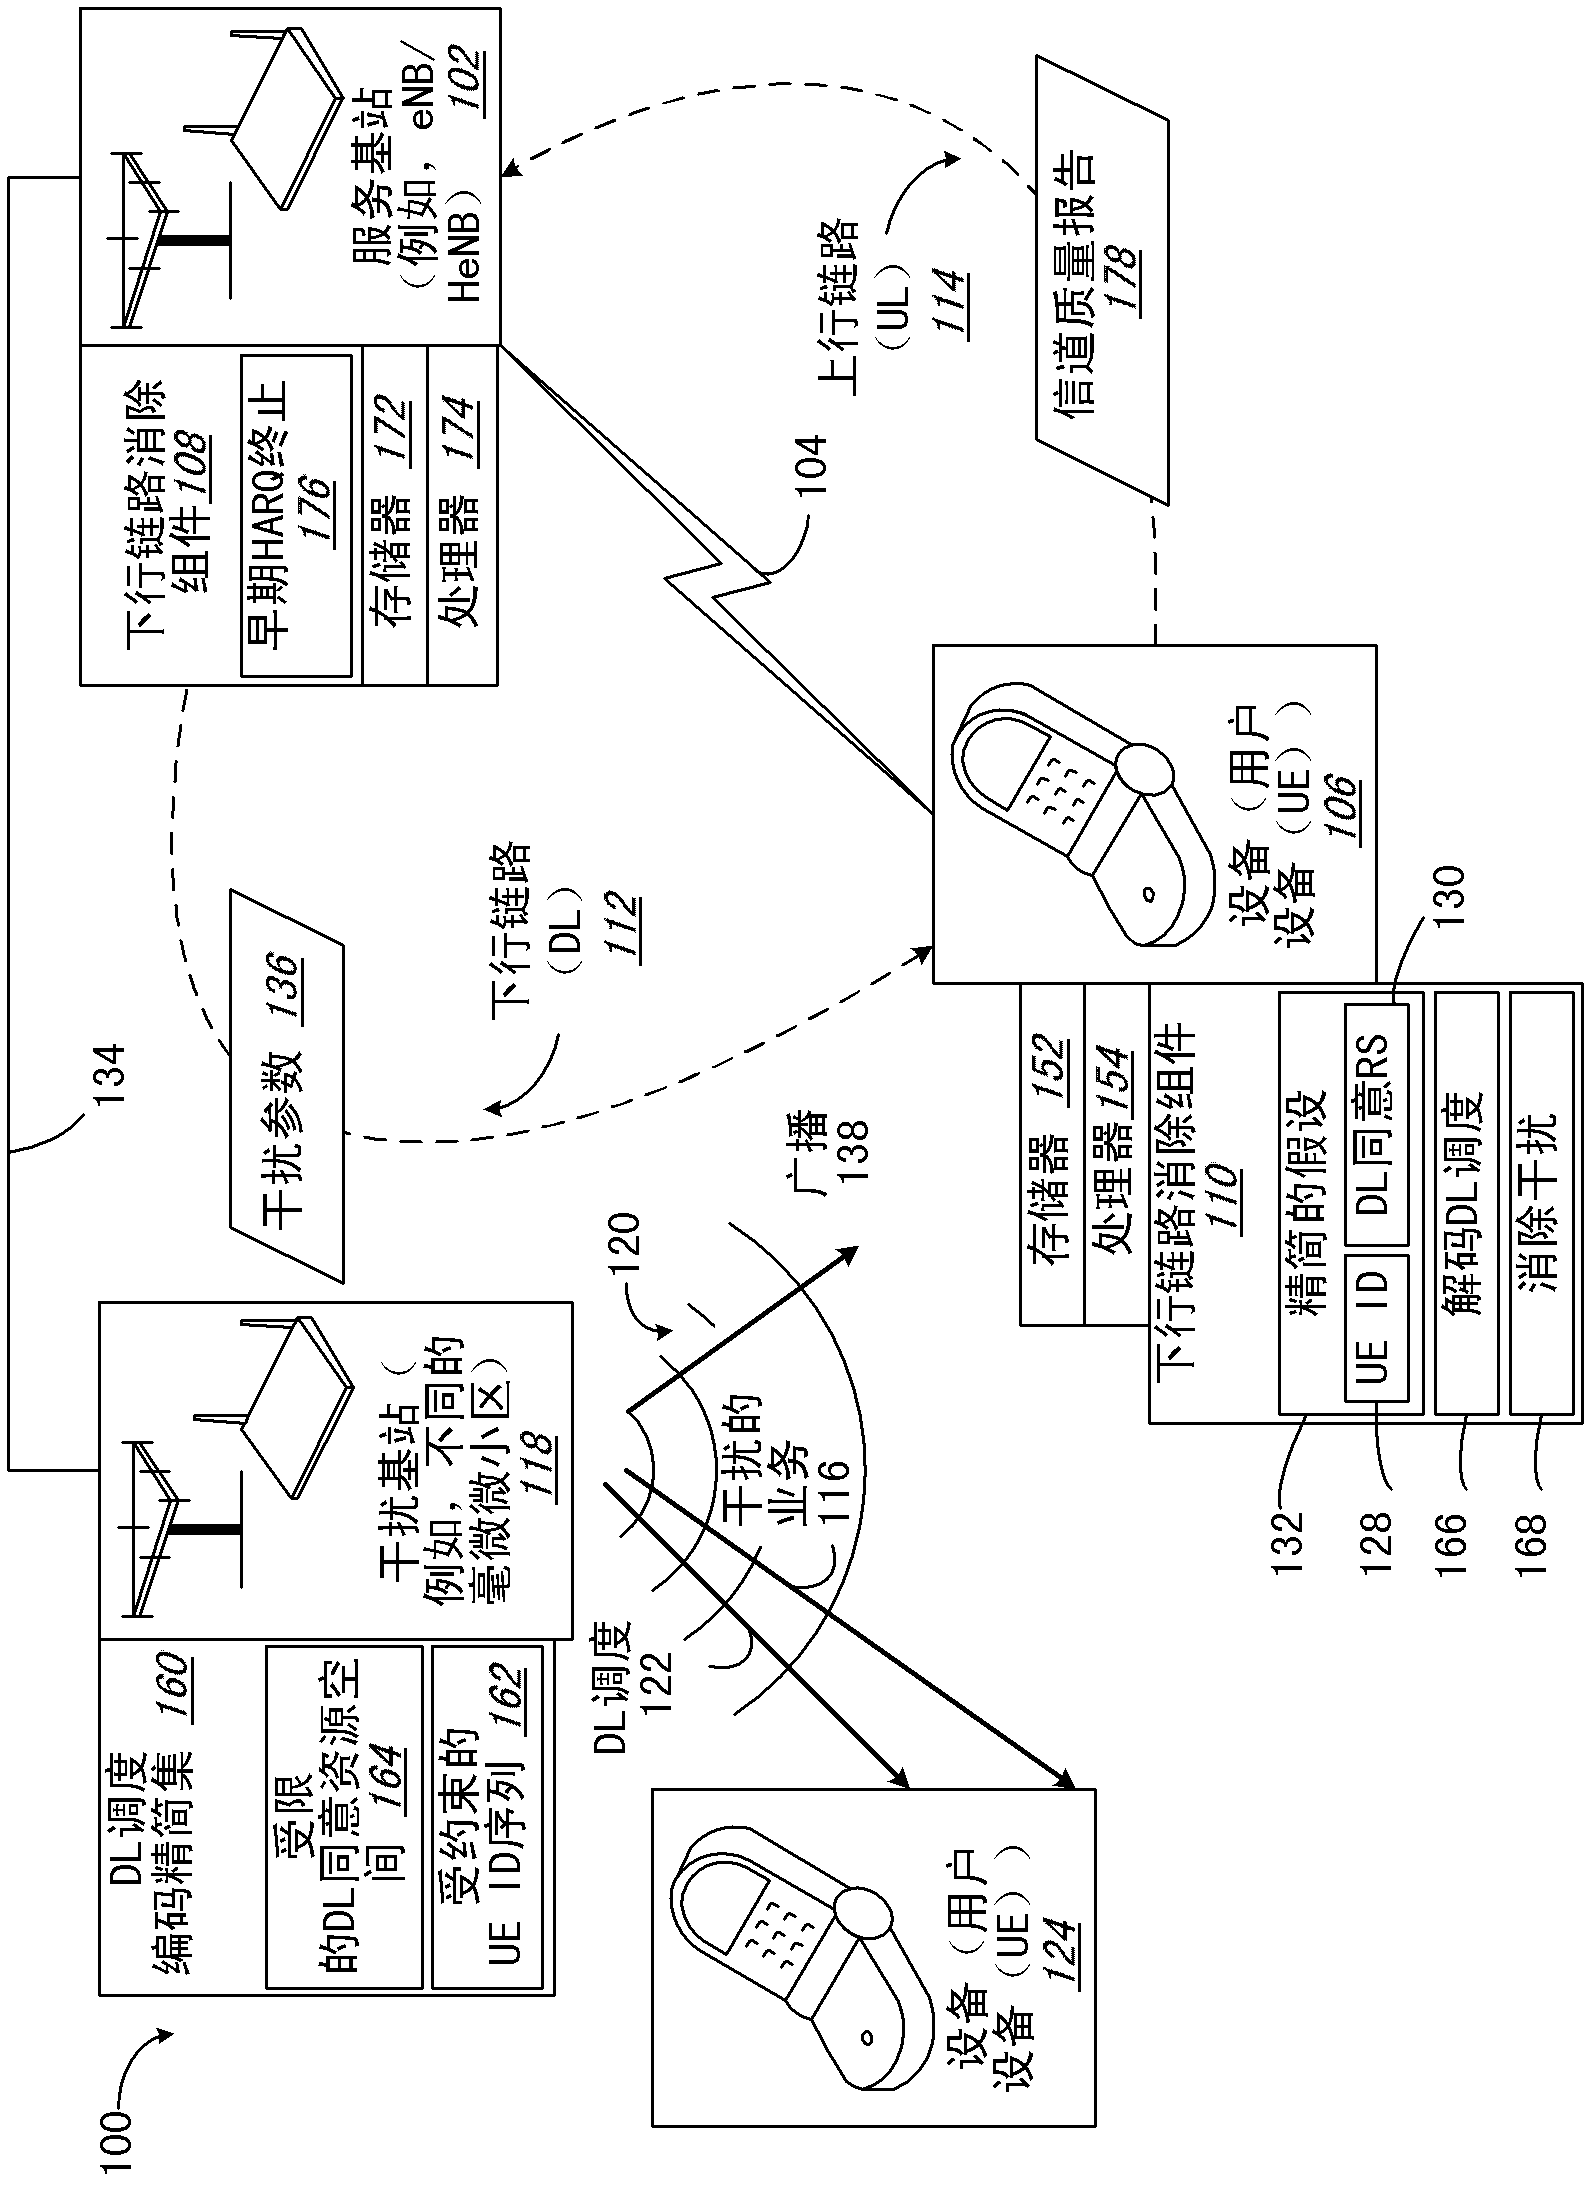 Downlink Interference Cancellation Method